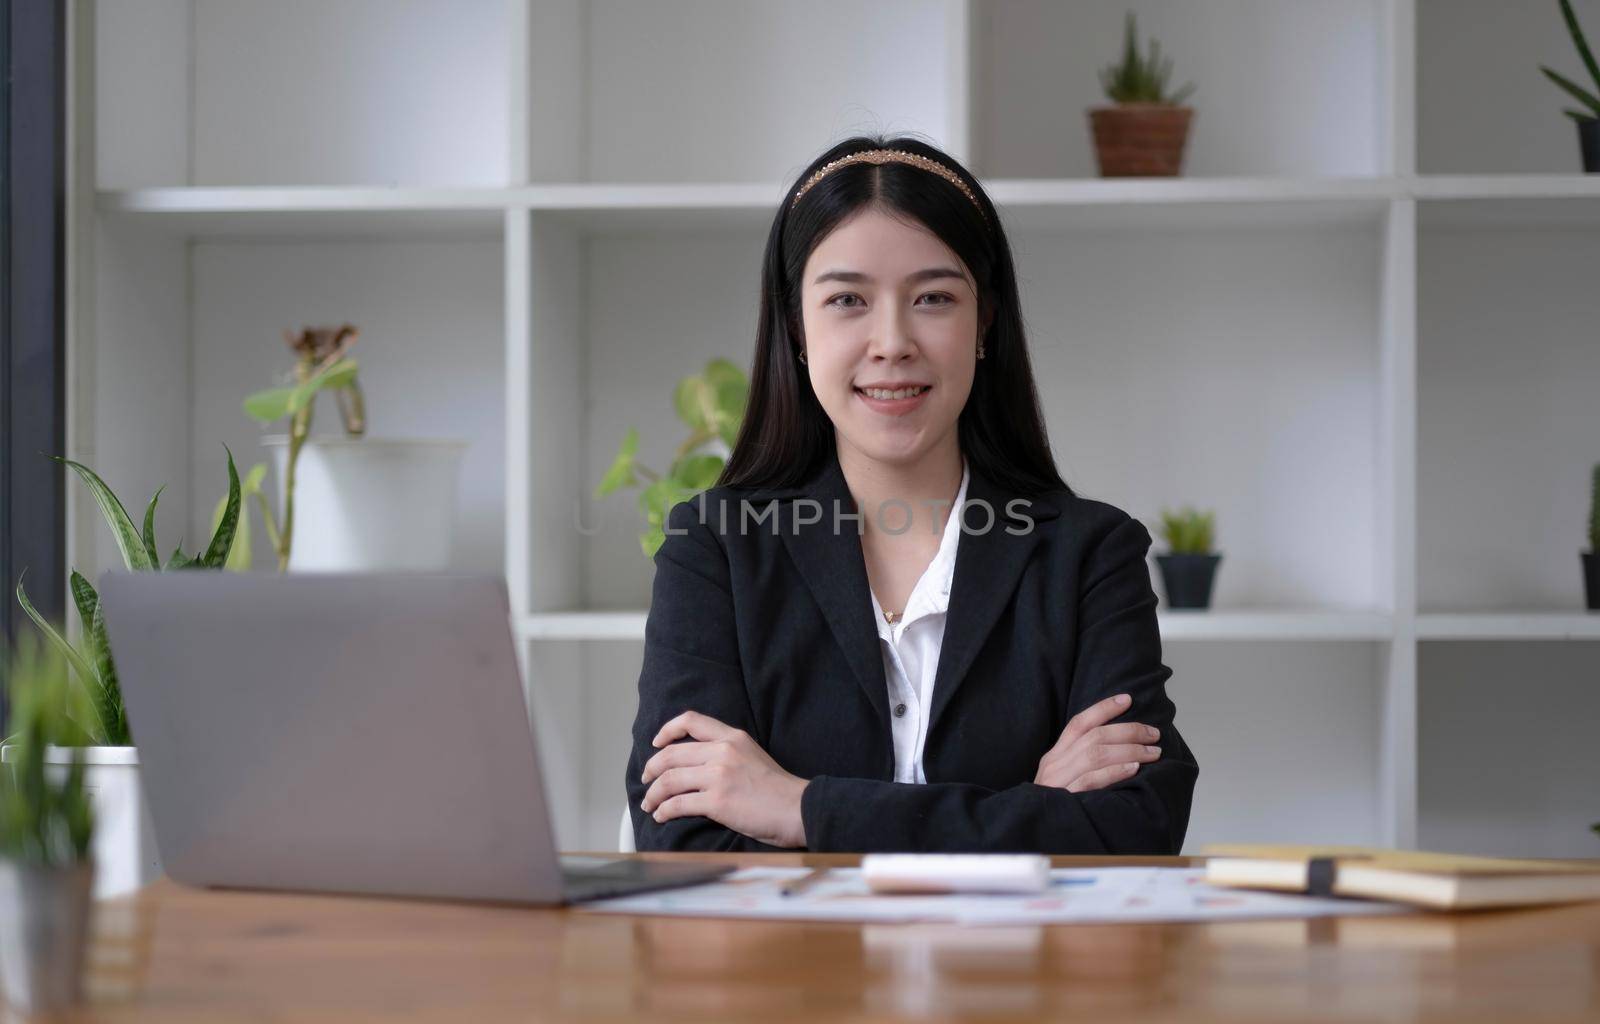 Charming Asian woman working at the office using a laptop Looking at the camera..